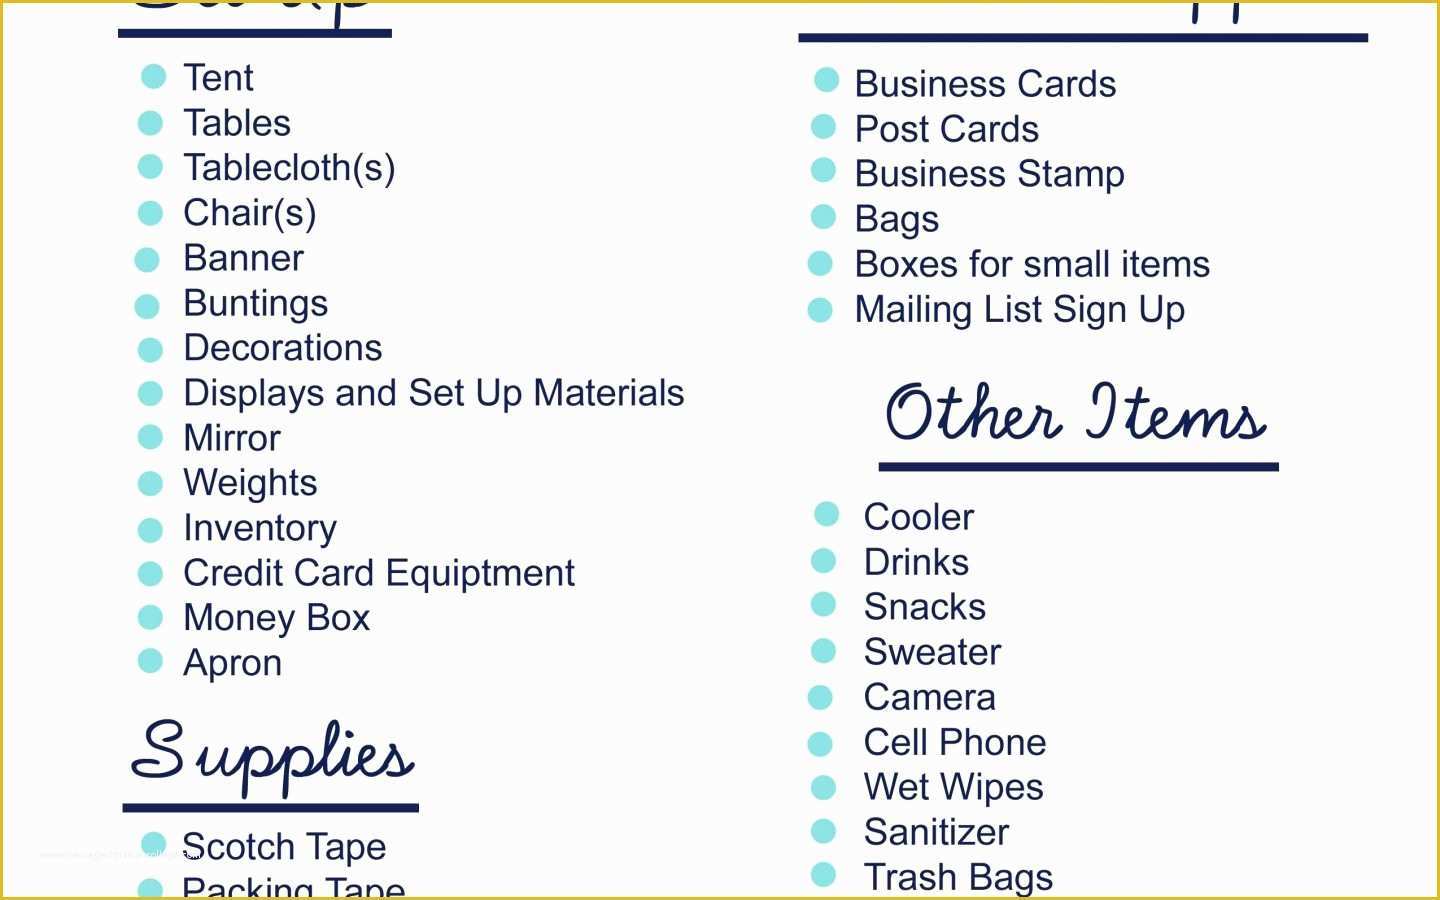 Free Printable Business Card Templates Pdf Of Print Business Cards at Home Word Free Printable Create